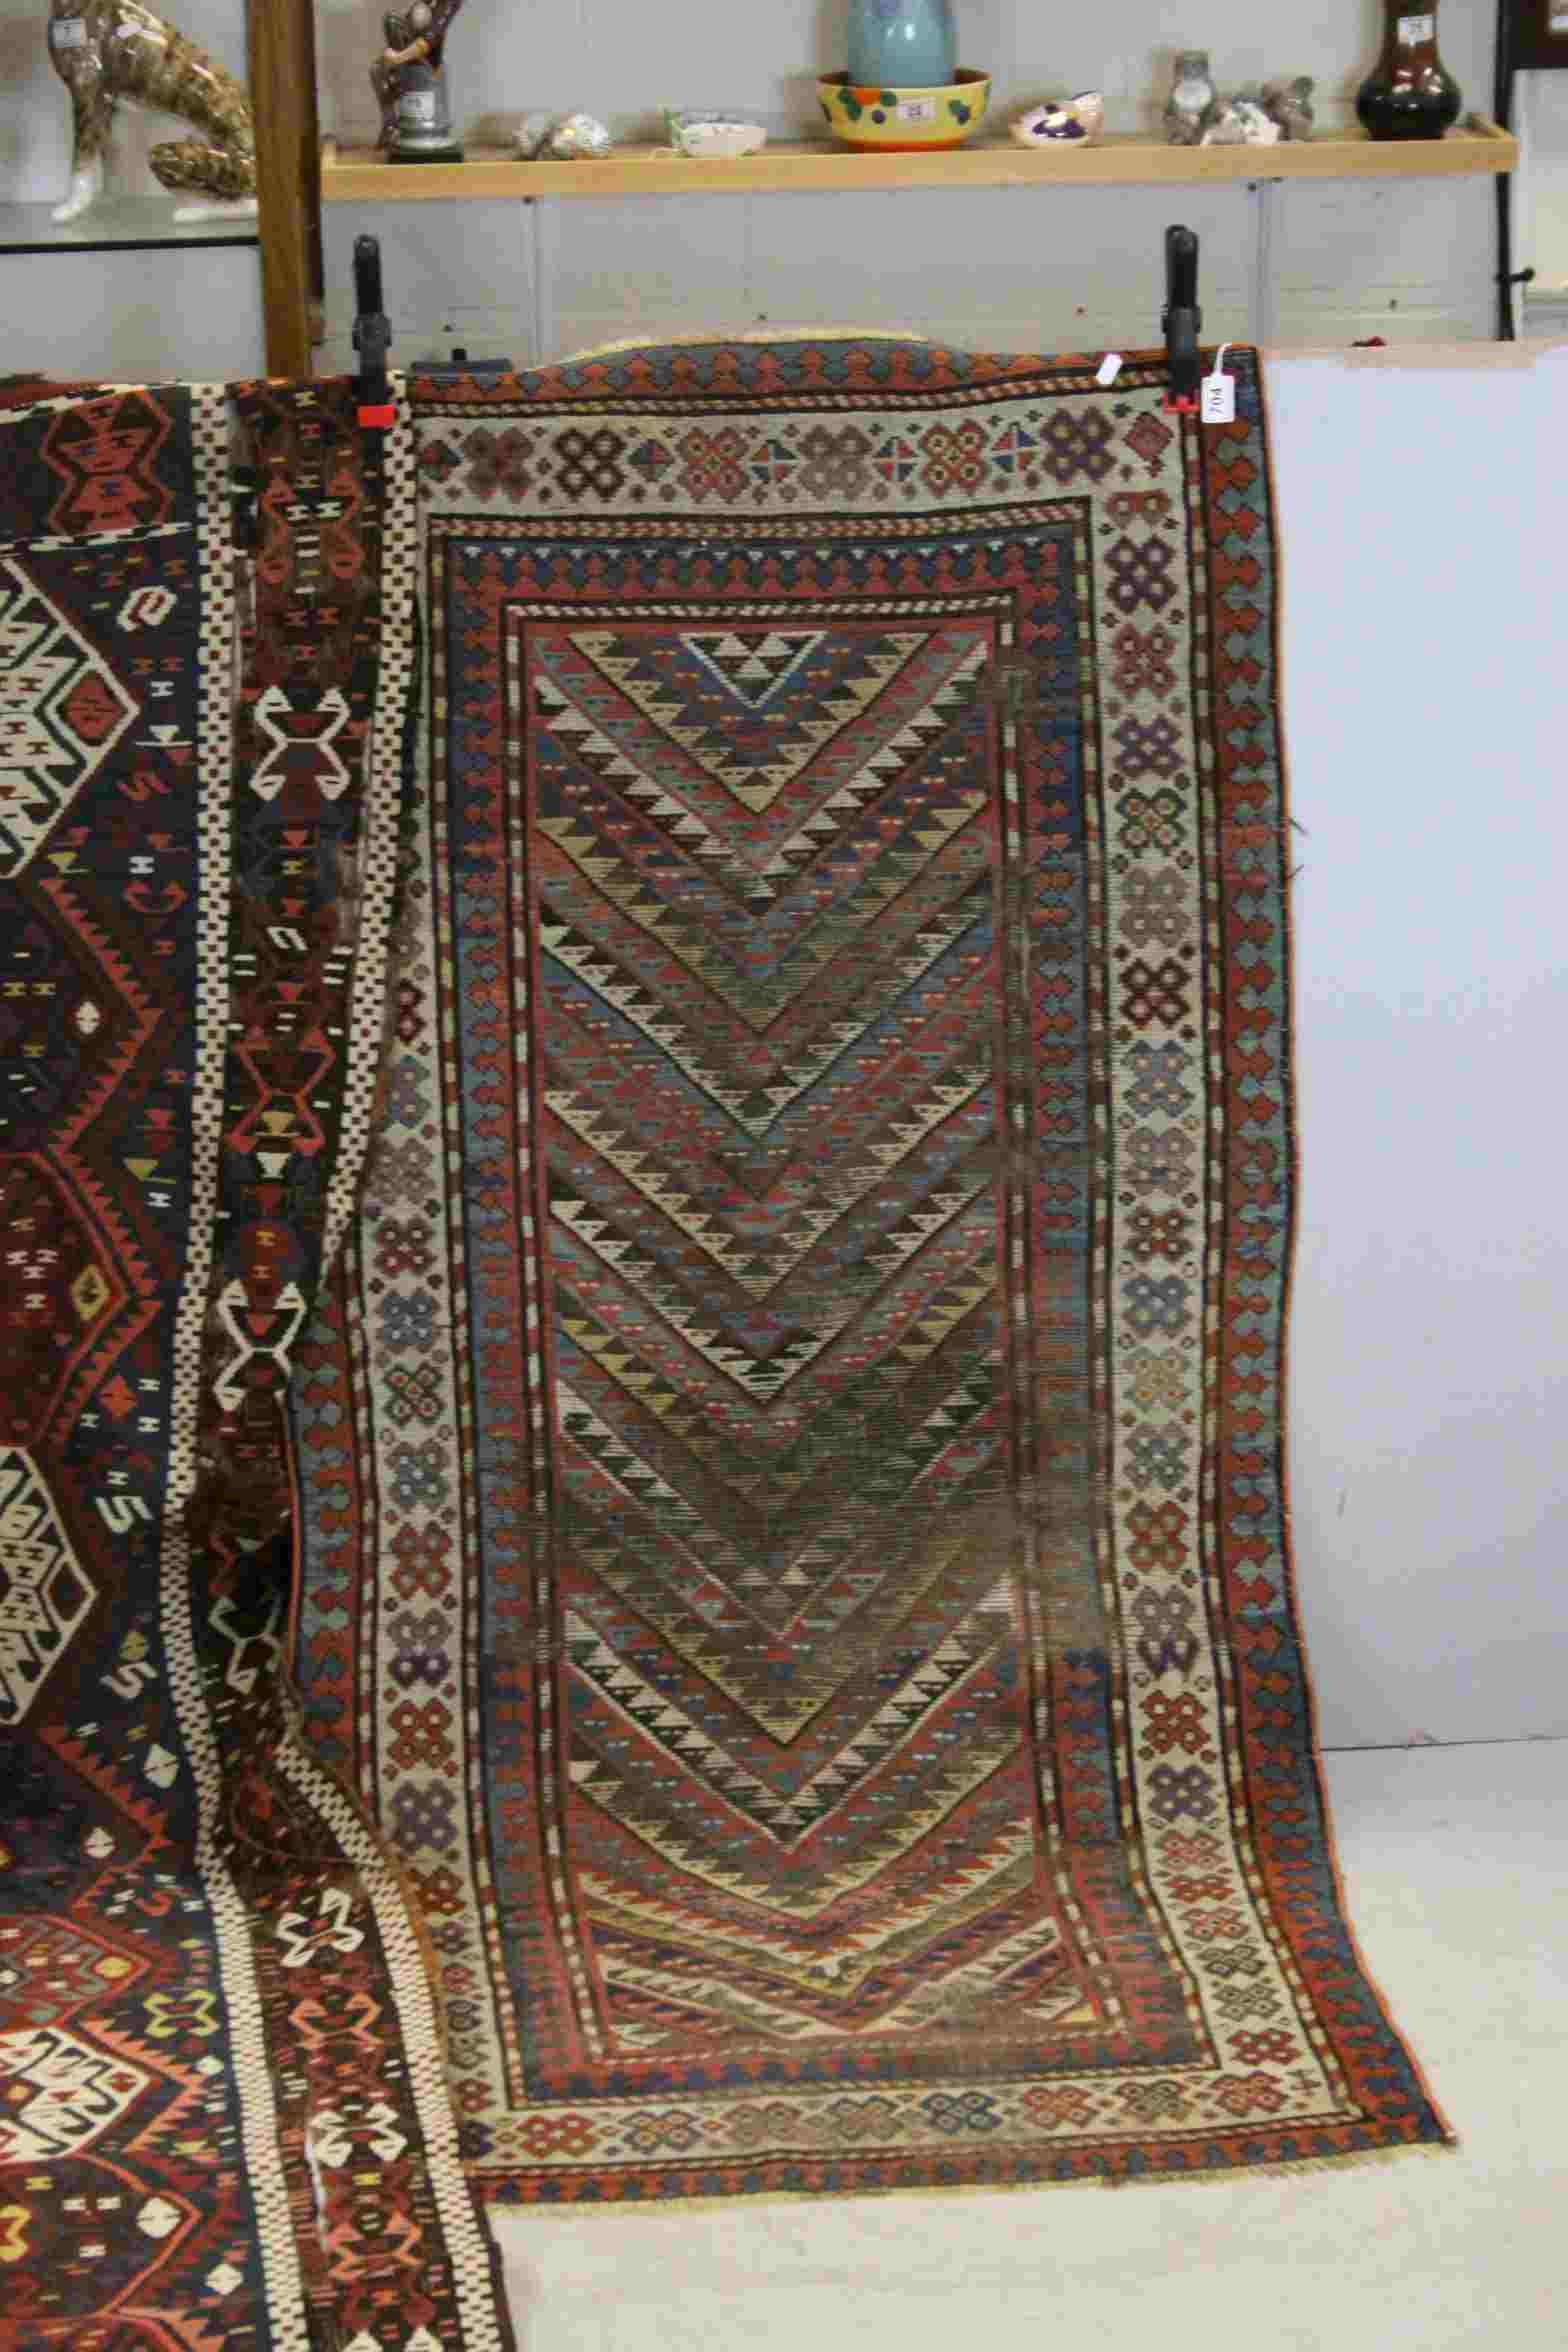 Eastern Red and Blue Ground Rug 300cms x 125cms together with another Rug 182cms x 86cms - Image 2 of 9